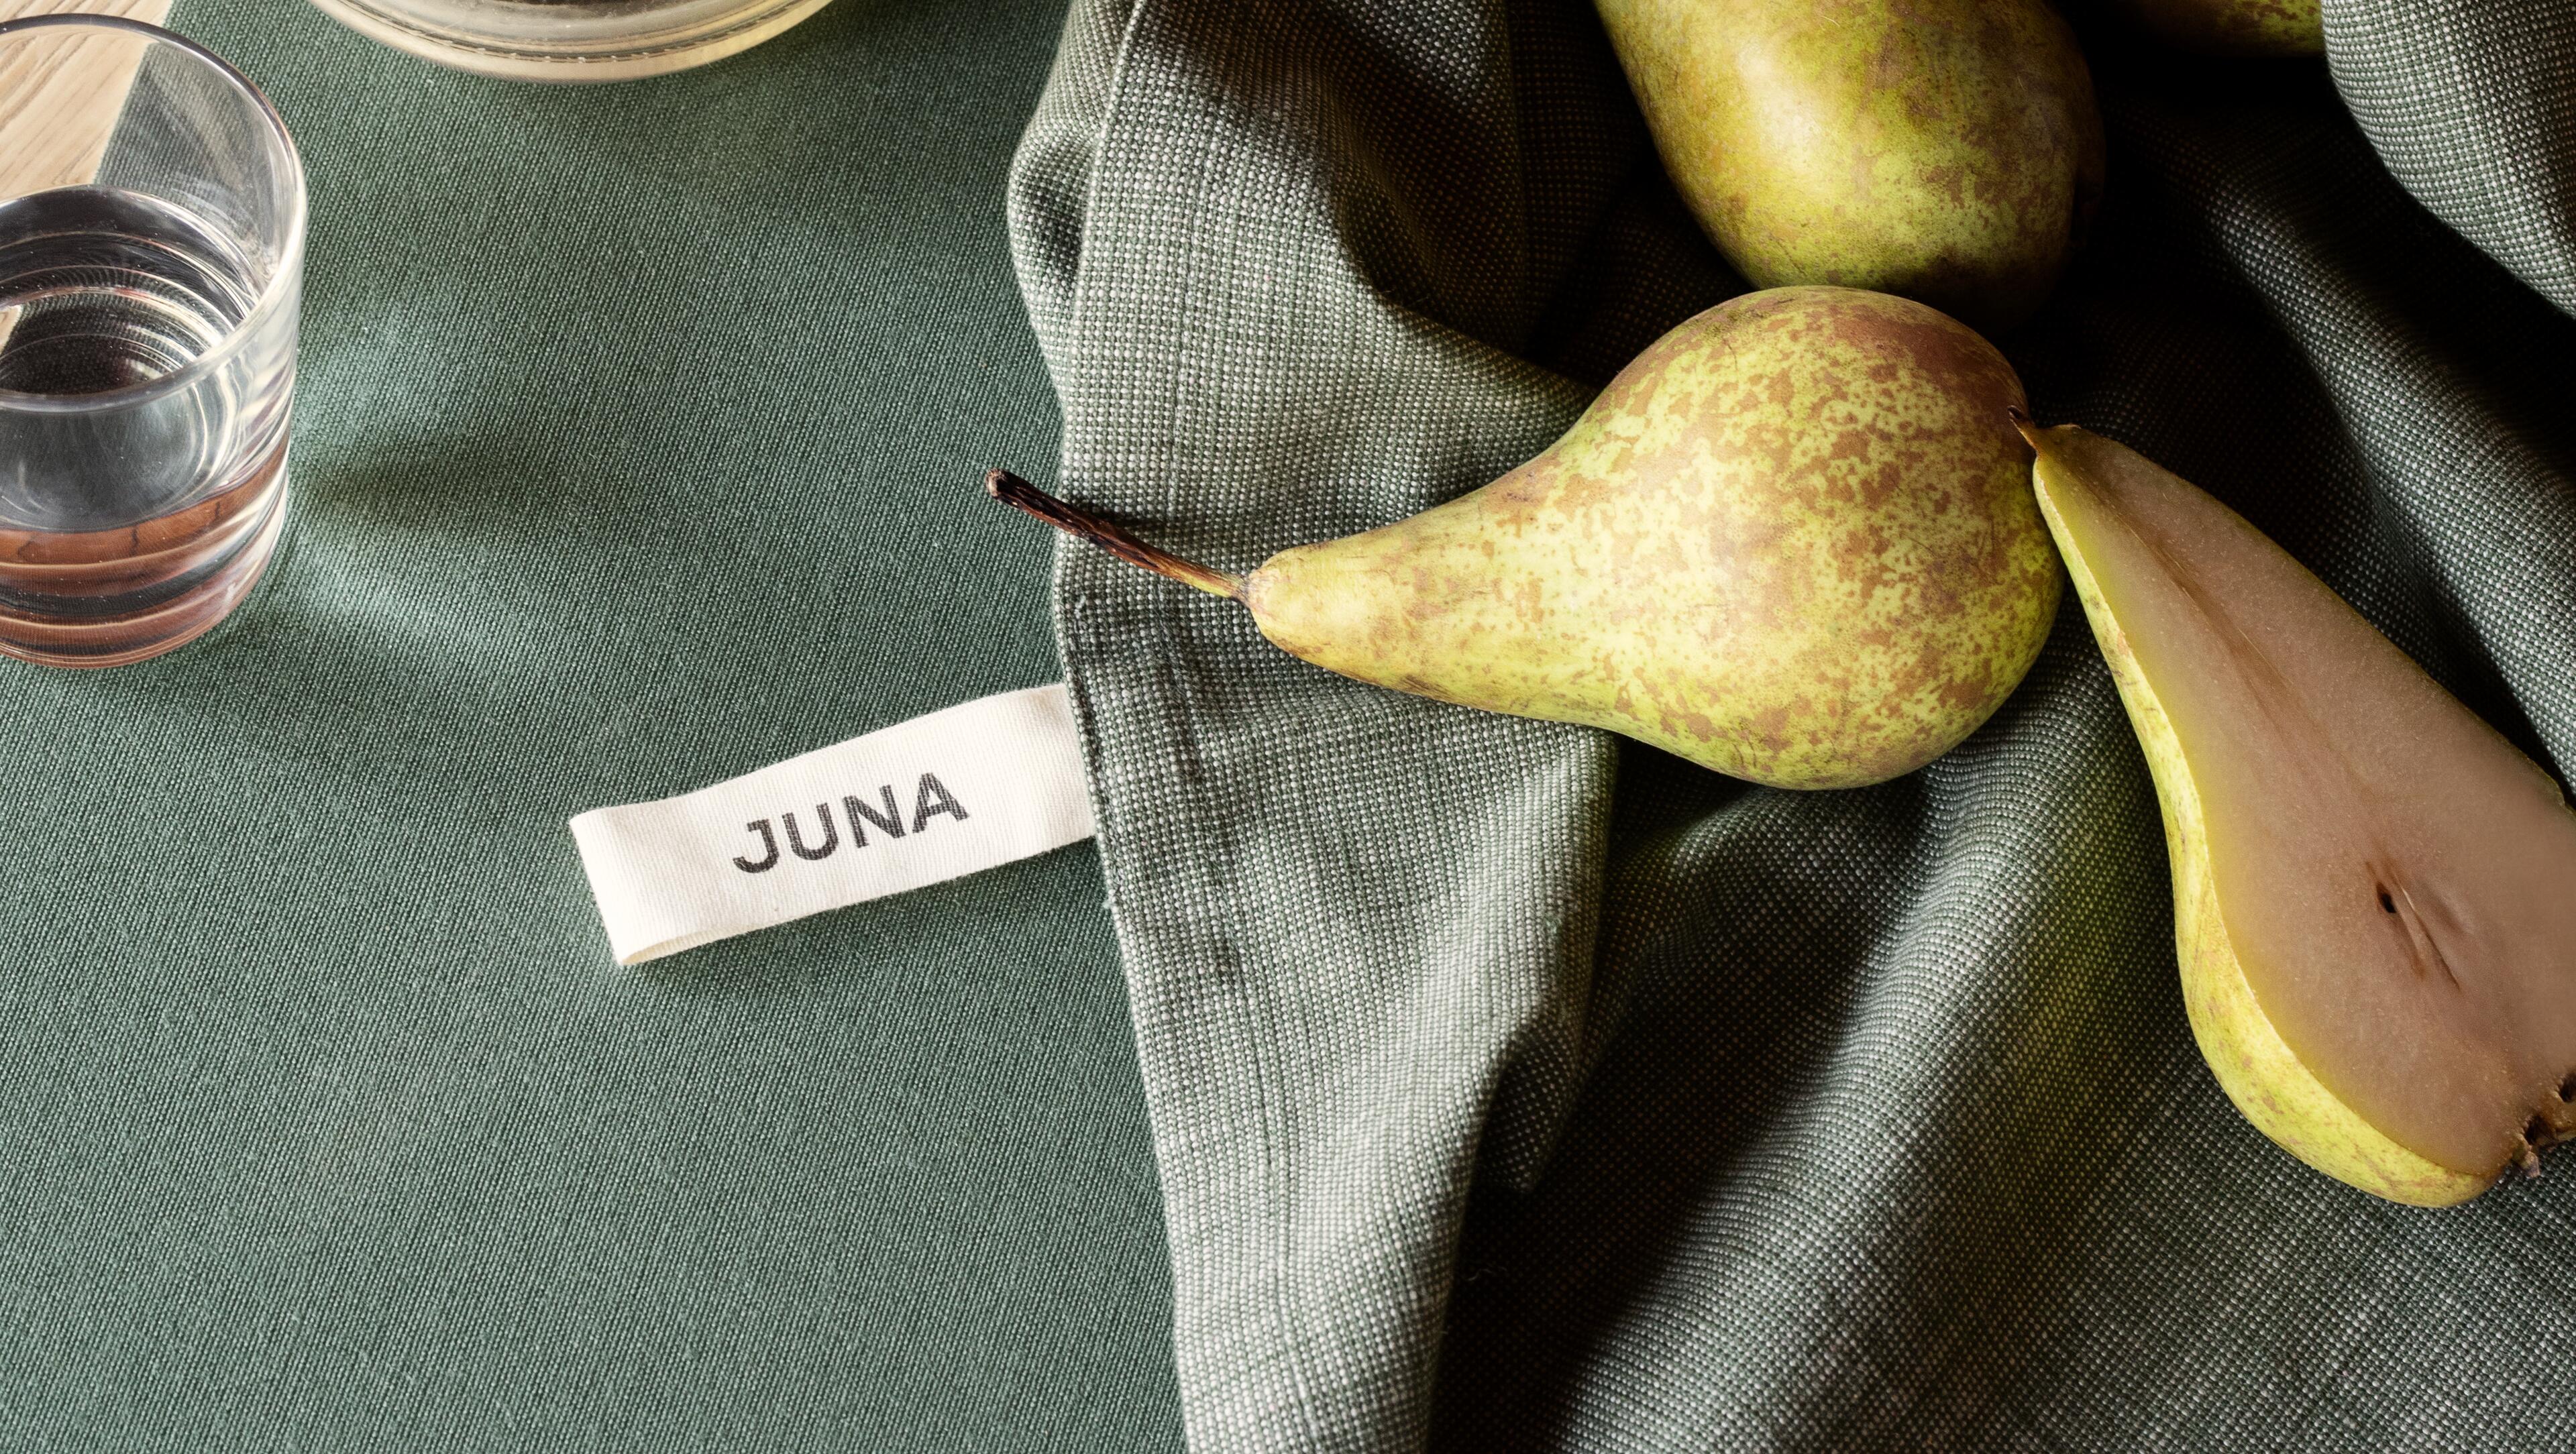 Napkins in fabric. Cloth napkins from JUNA